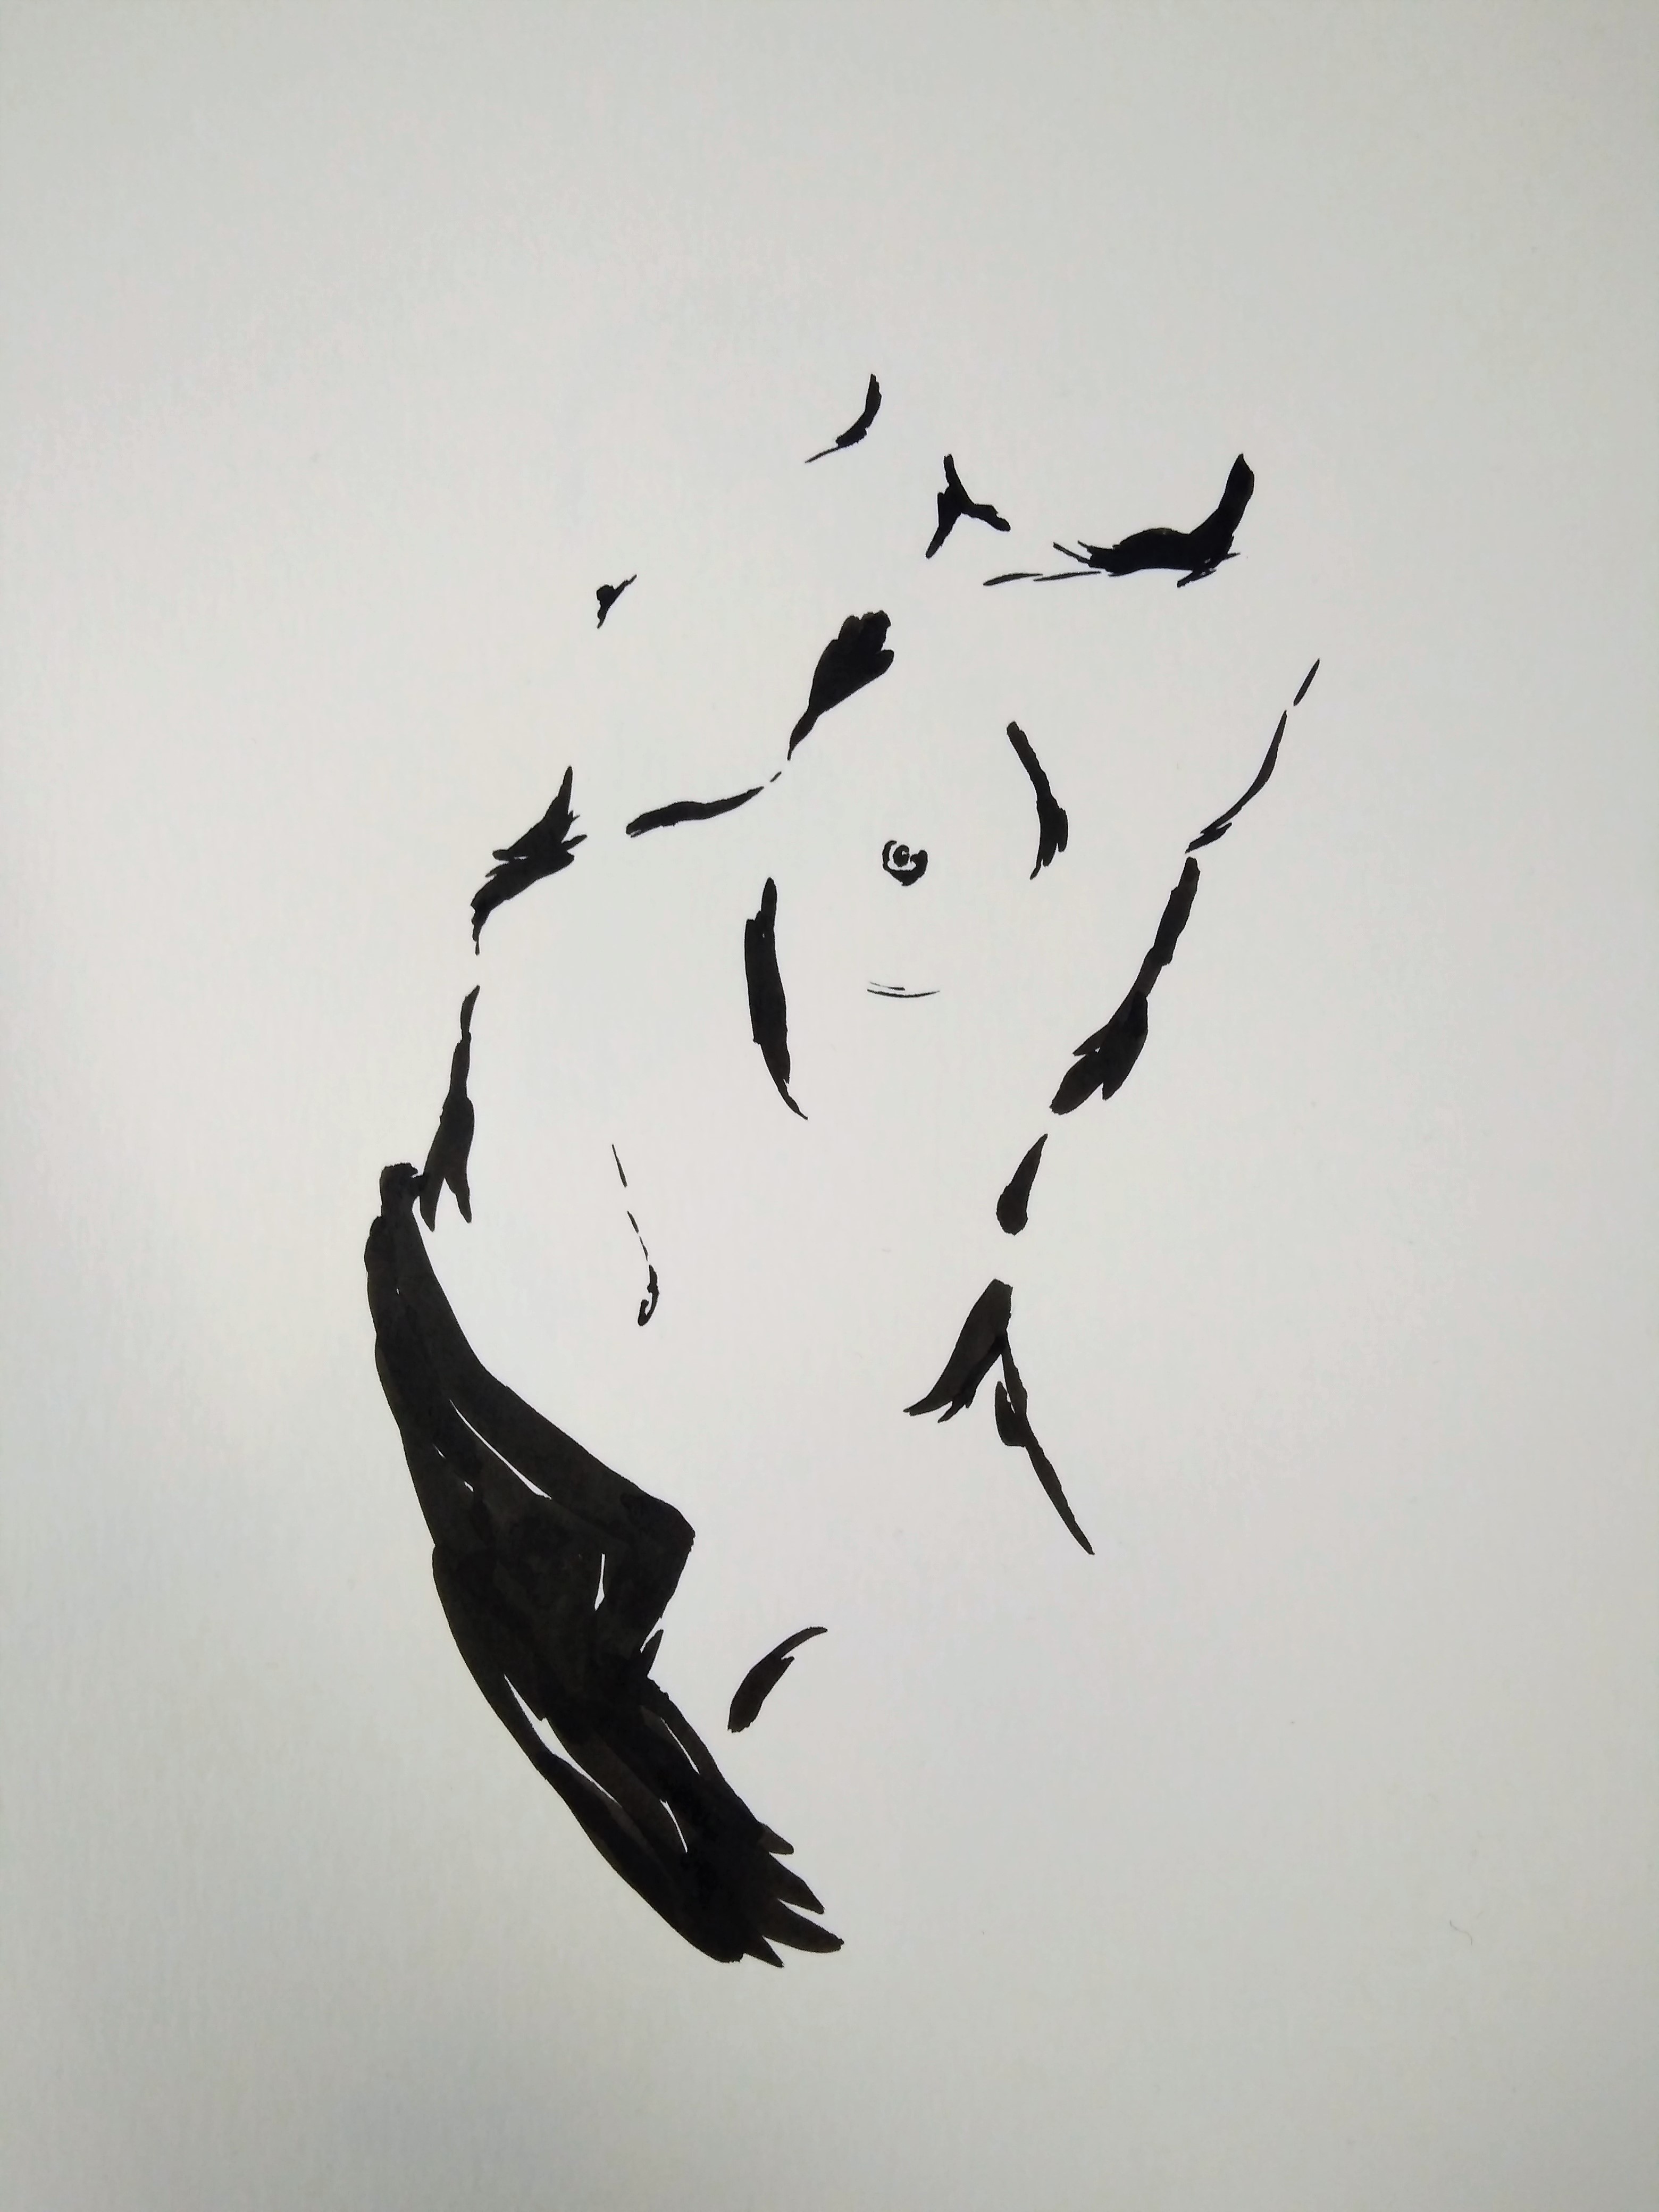 Life drawing, Indian ink and brush, 2020.